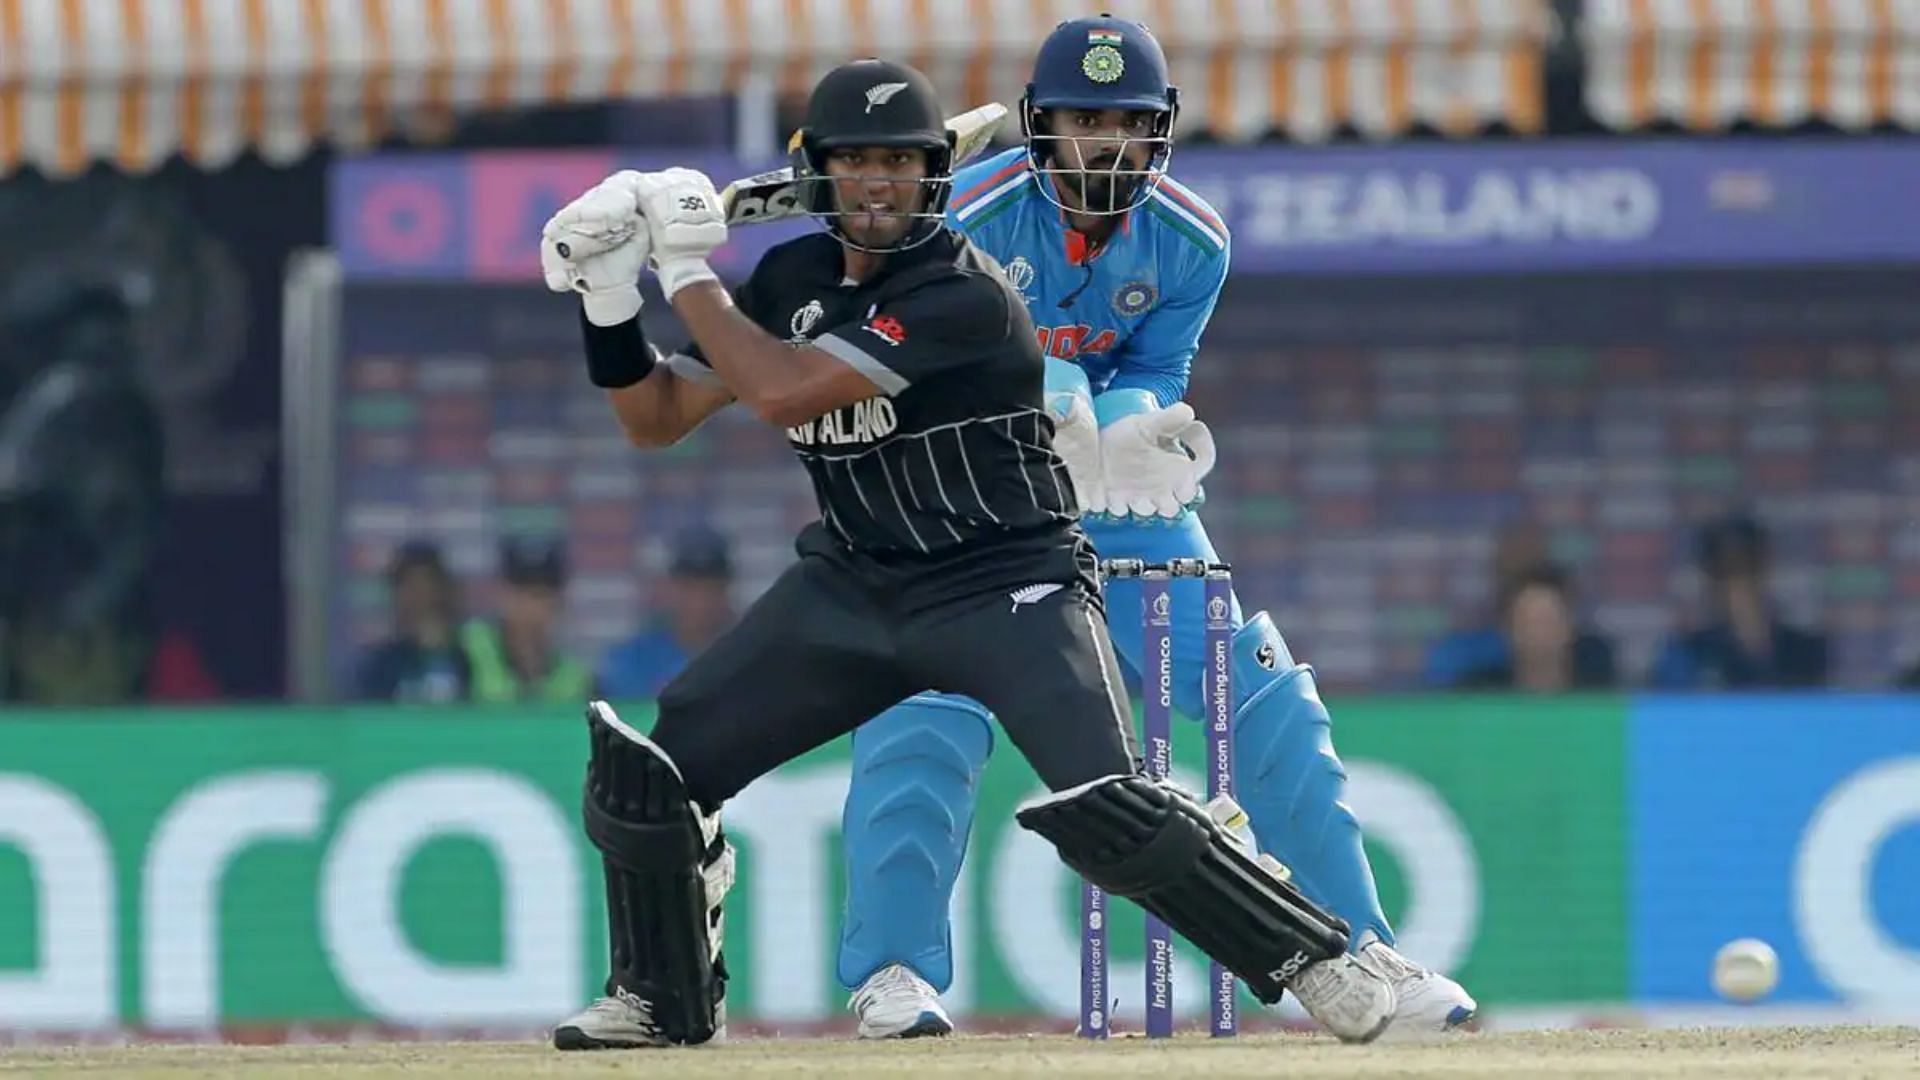 Can the in-form Rachin Ravindra cause some problems for India?